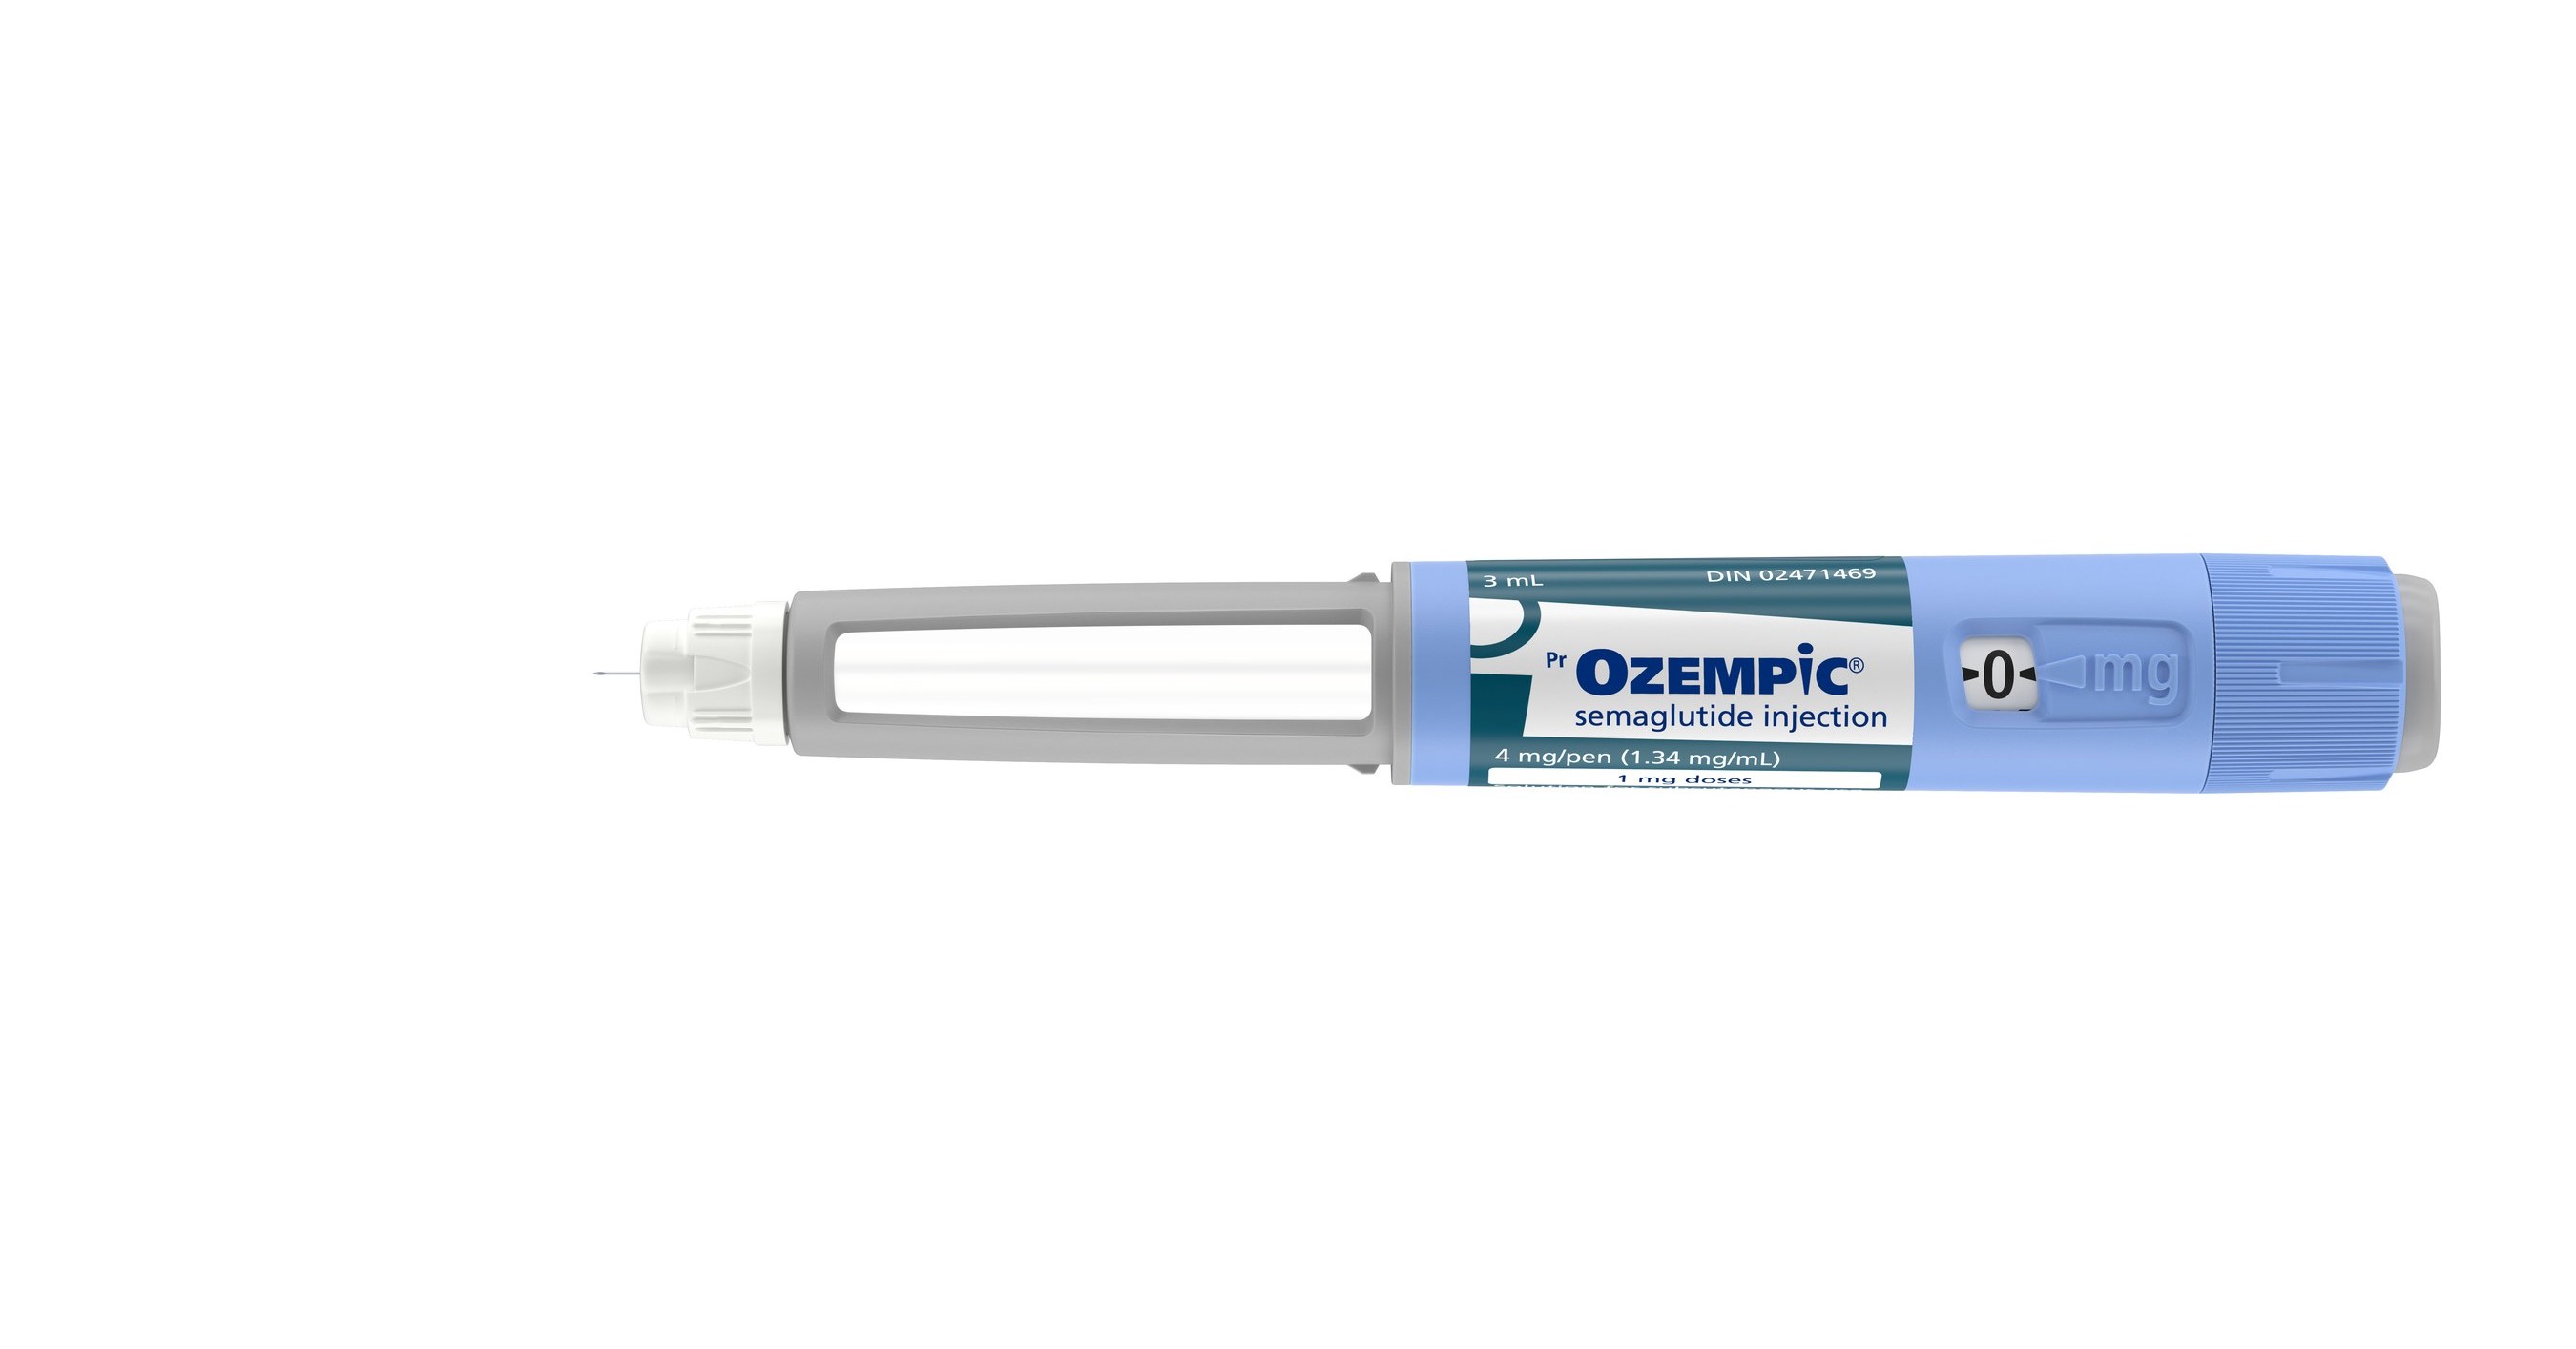 OZEMPIC® is now listed on the Alberta provincial formulary for adults